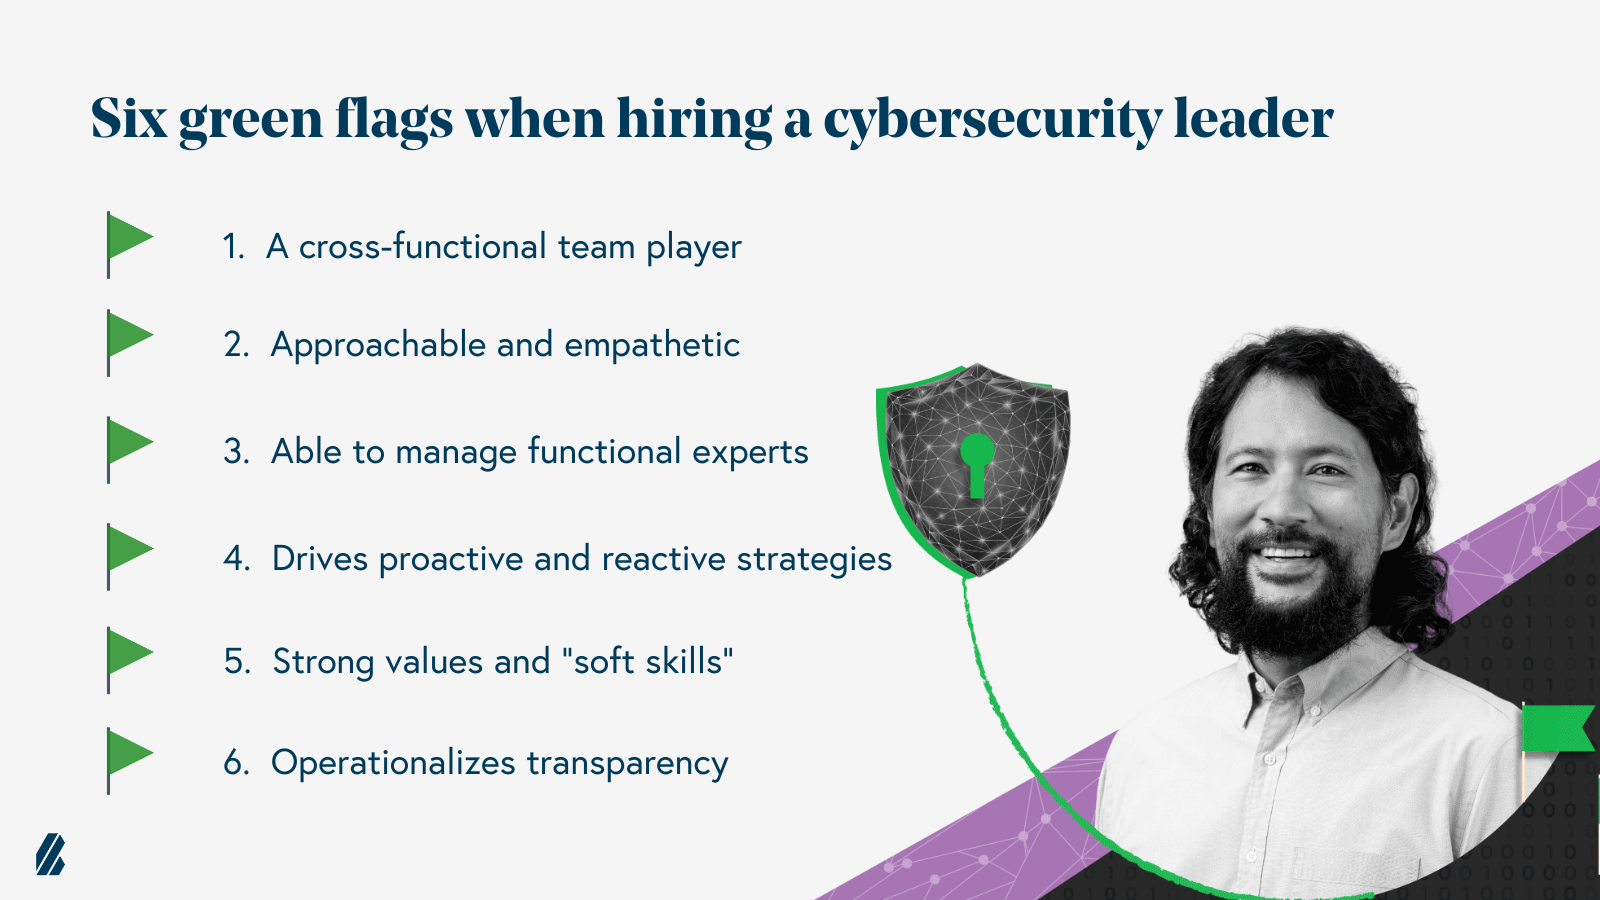 Six green flags when hiring a cybersecurity leader